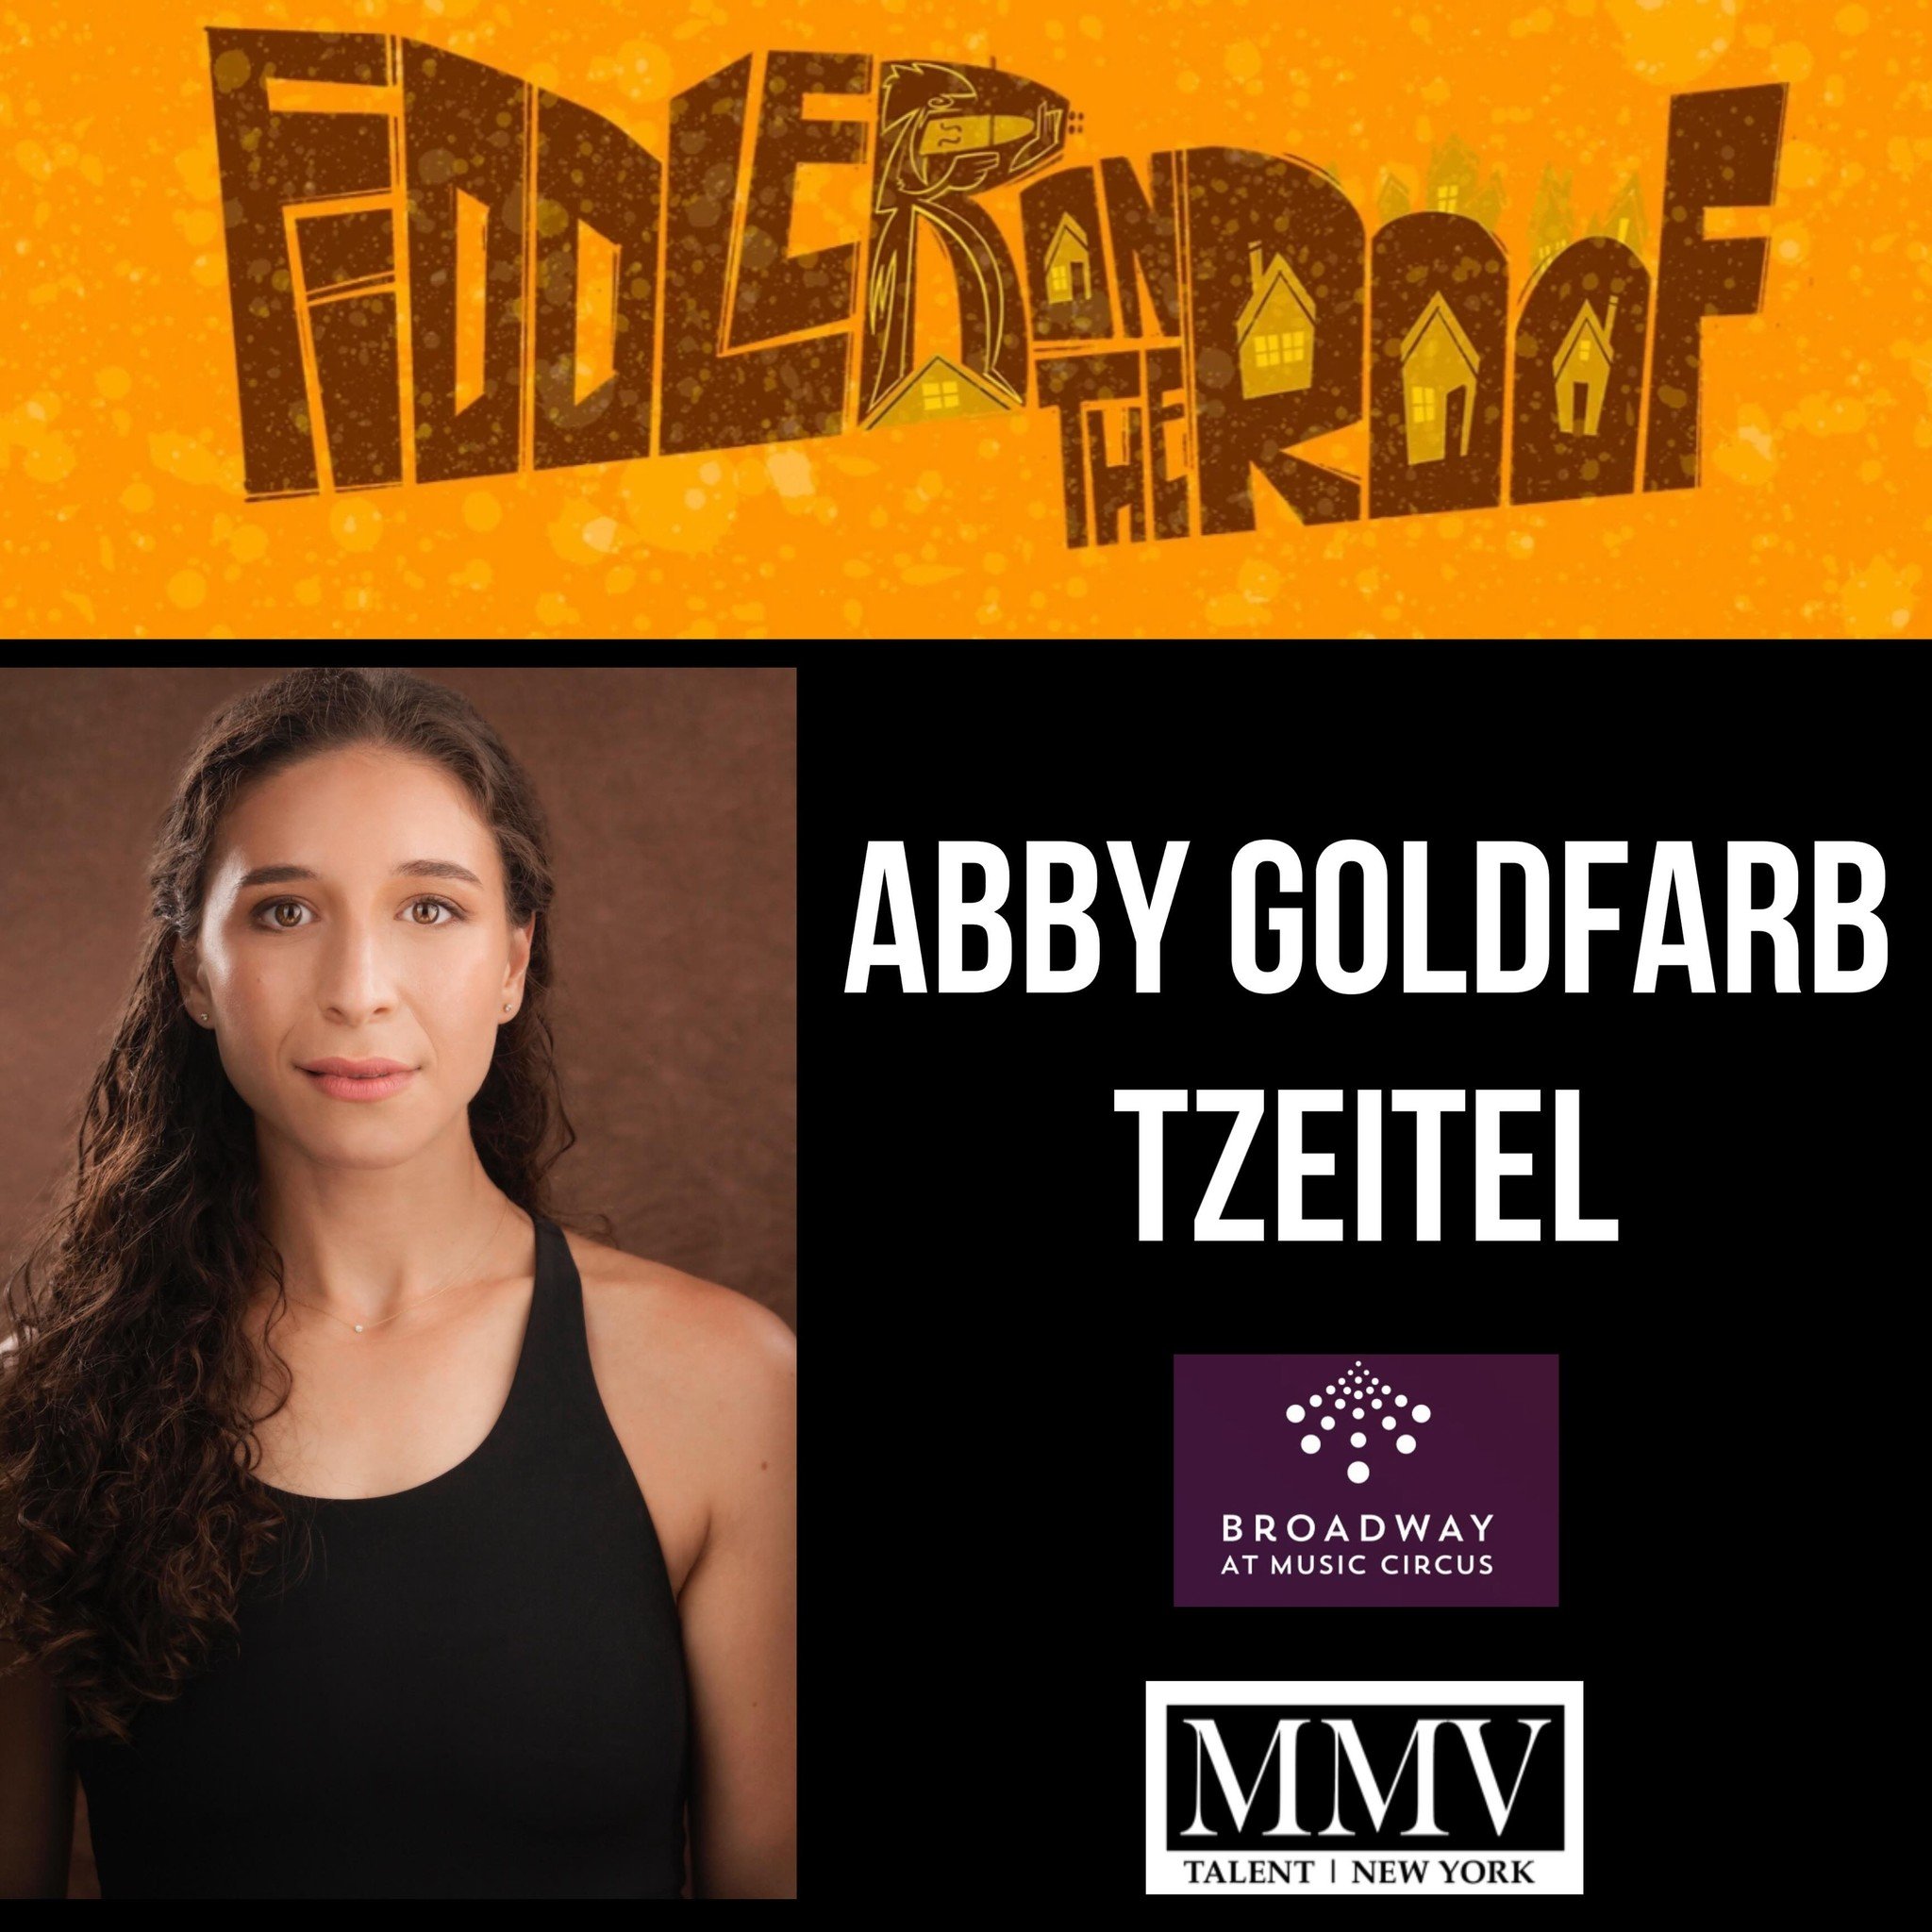 ABBY GOLDFARB is TZEITEL in Fiddler at Broadway At Music Circus this summer!! Go Abby 🤩
@abbygoldfarb 
#mmvtalent